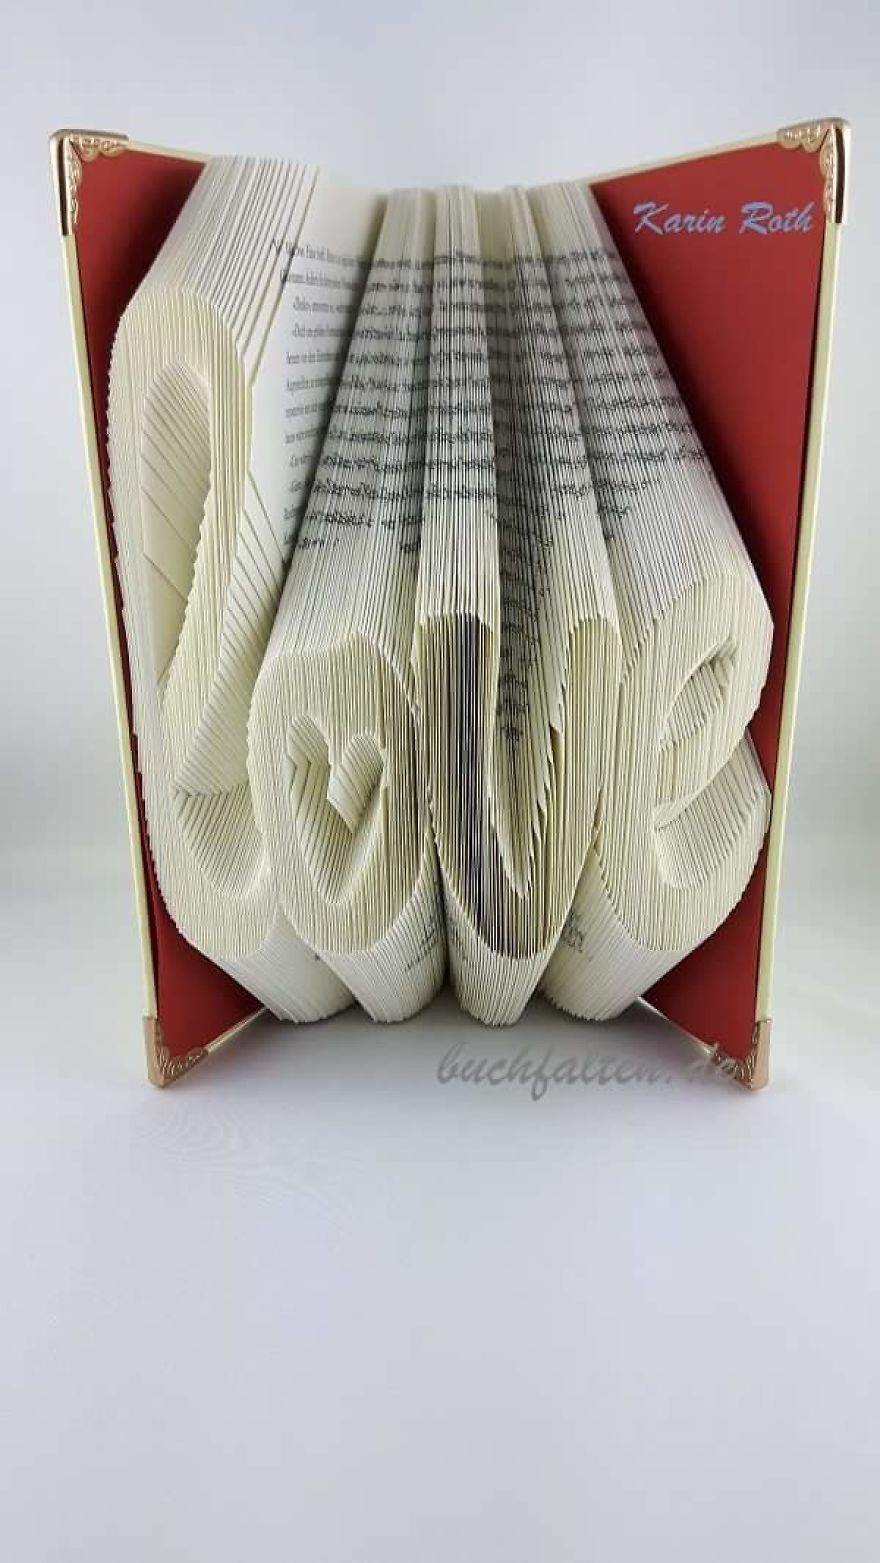 I Turn Books Into Works Of Art